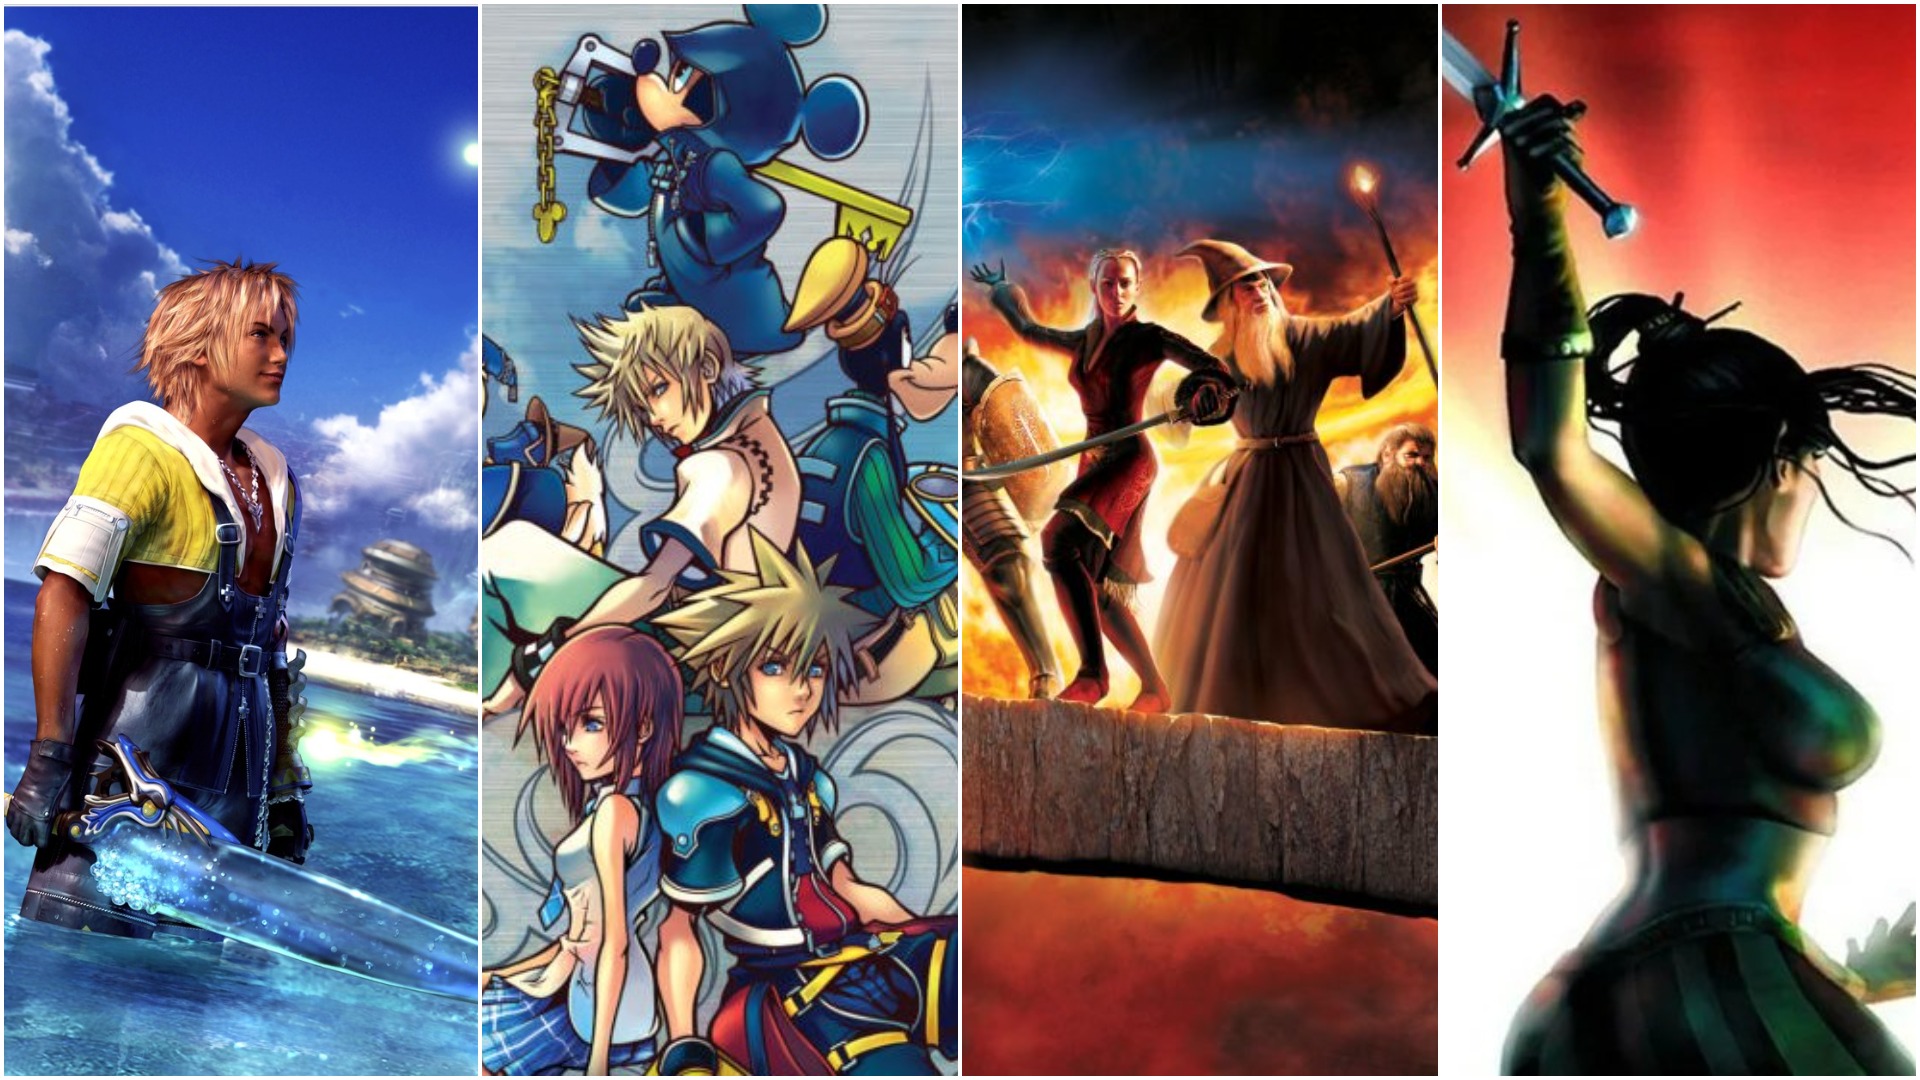 Get 'em While They Last! PlayStation Store RPGs for PS One, PS2